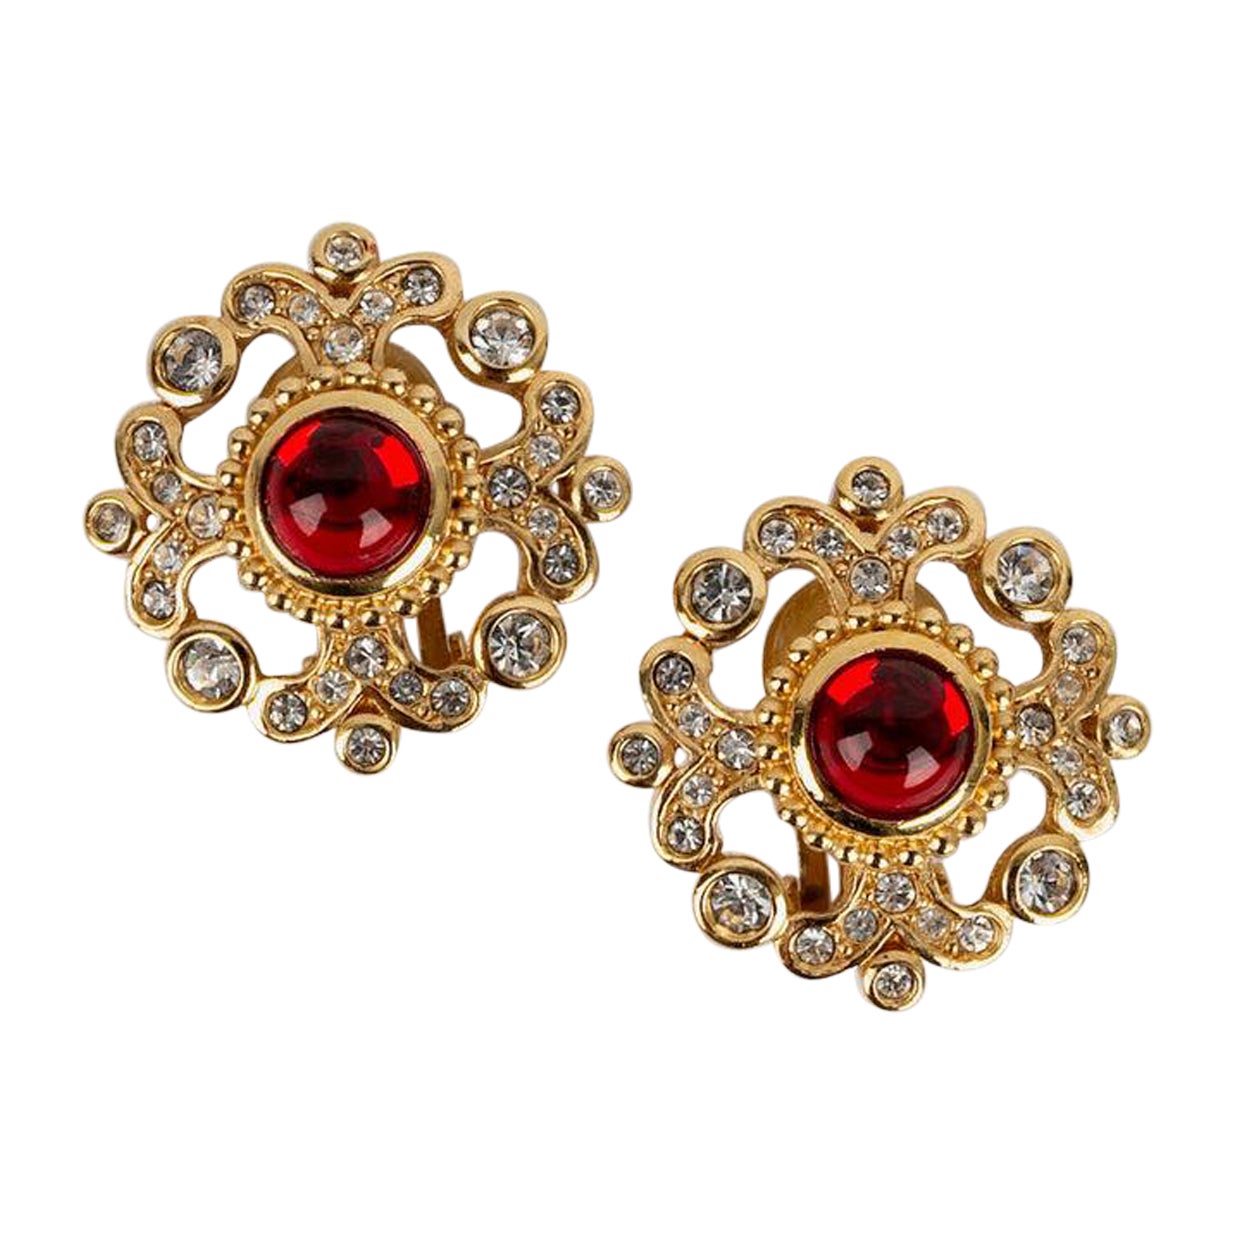 Dior Gold Plated Metal Clip Earrings Paved with Rhinestones and a Red Cabochon For Sale